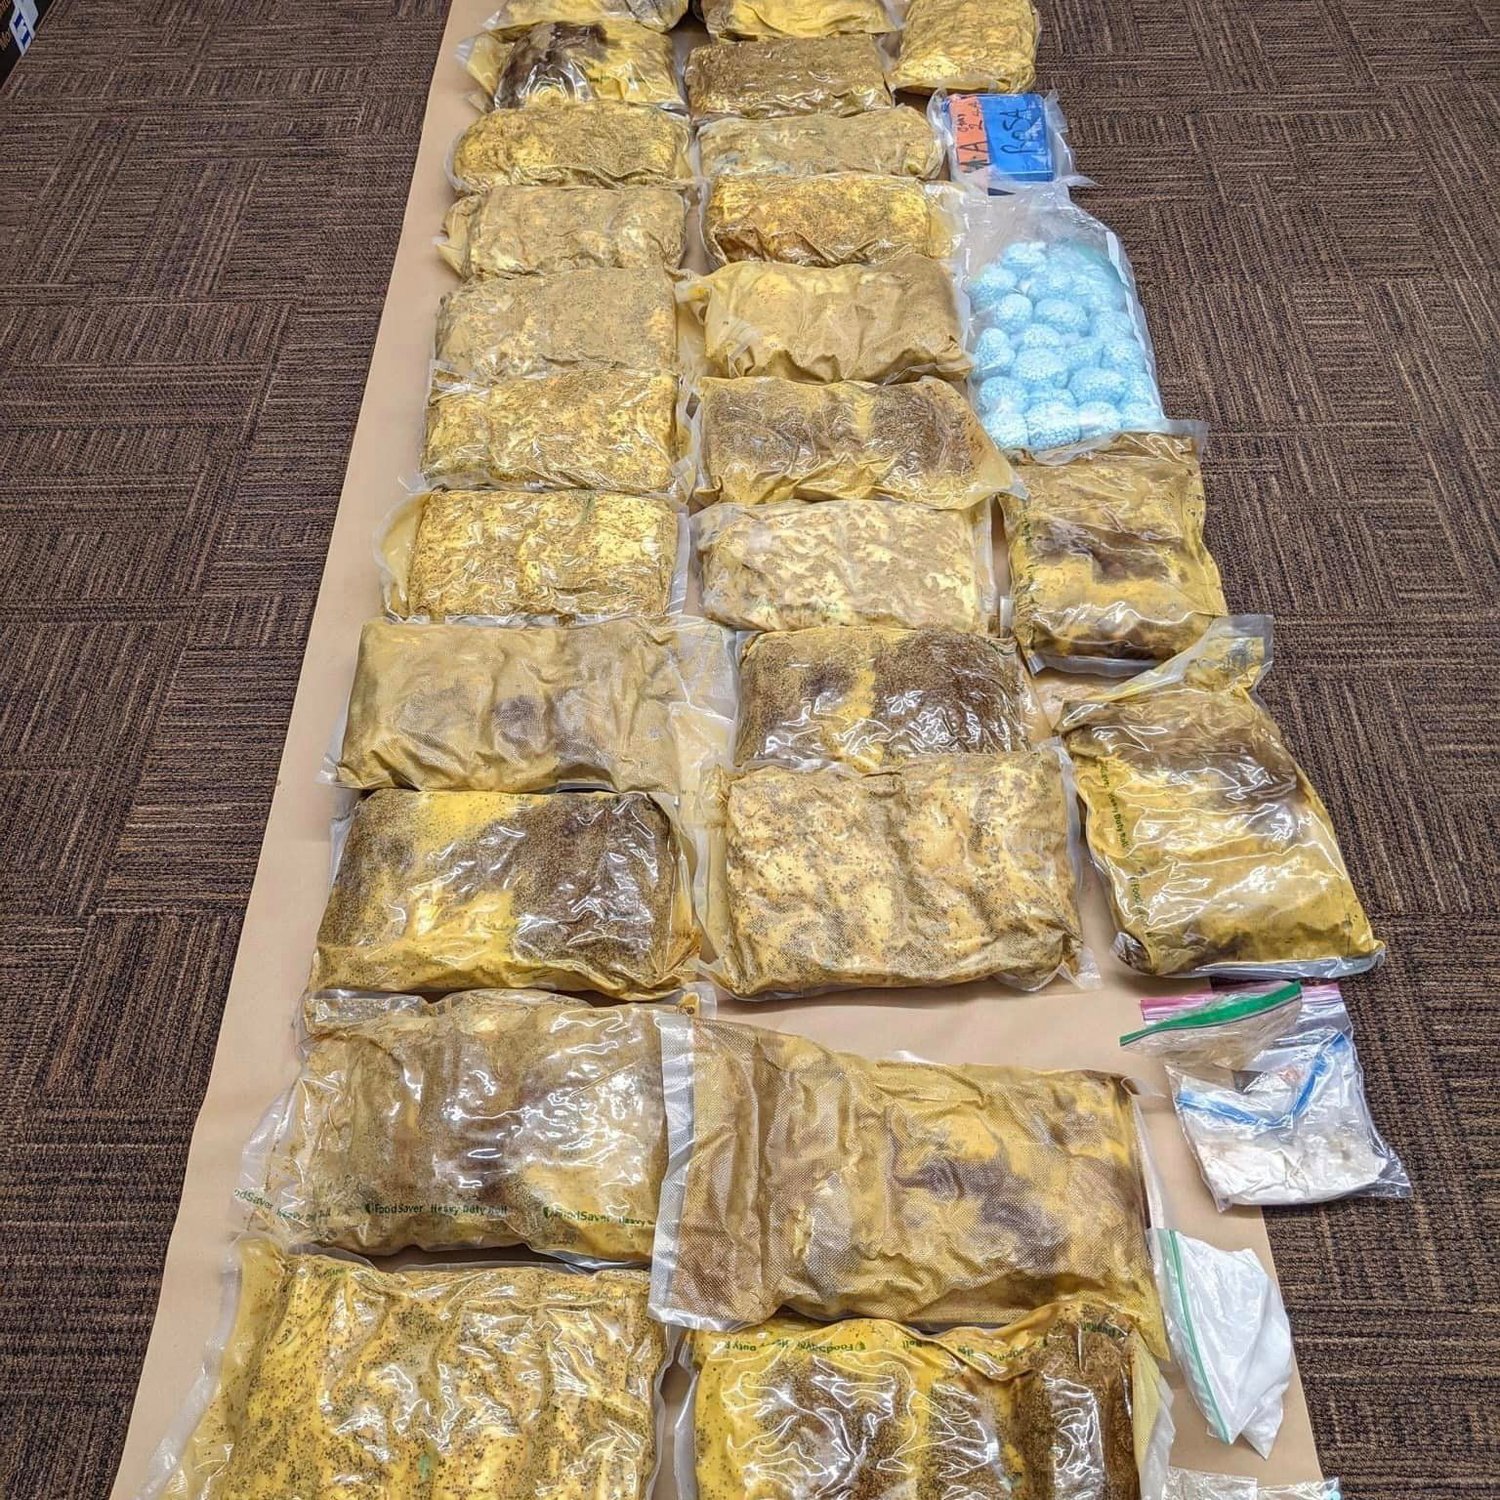 A coordinated arrest and search operation last Wednesday — involving 10 SWAT teams and more than 350 officers — yielded 177 guns, several kilograms of drugs and more than $330,000 in cash from 18 locations in Washington and Arizona.